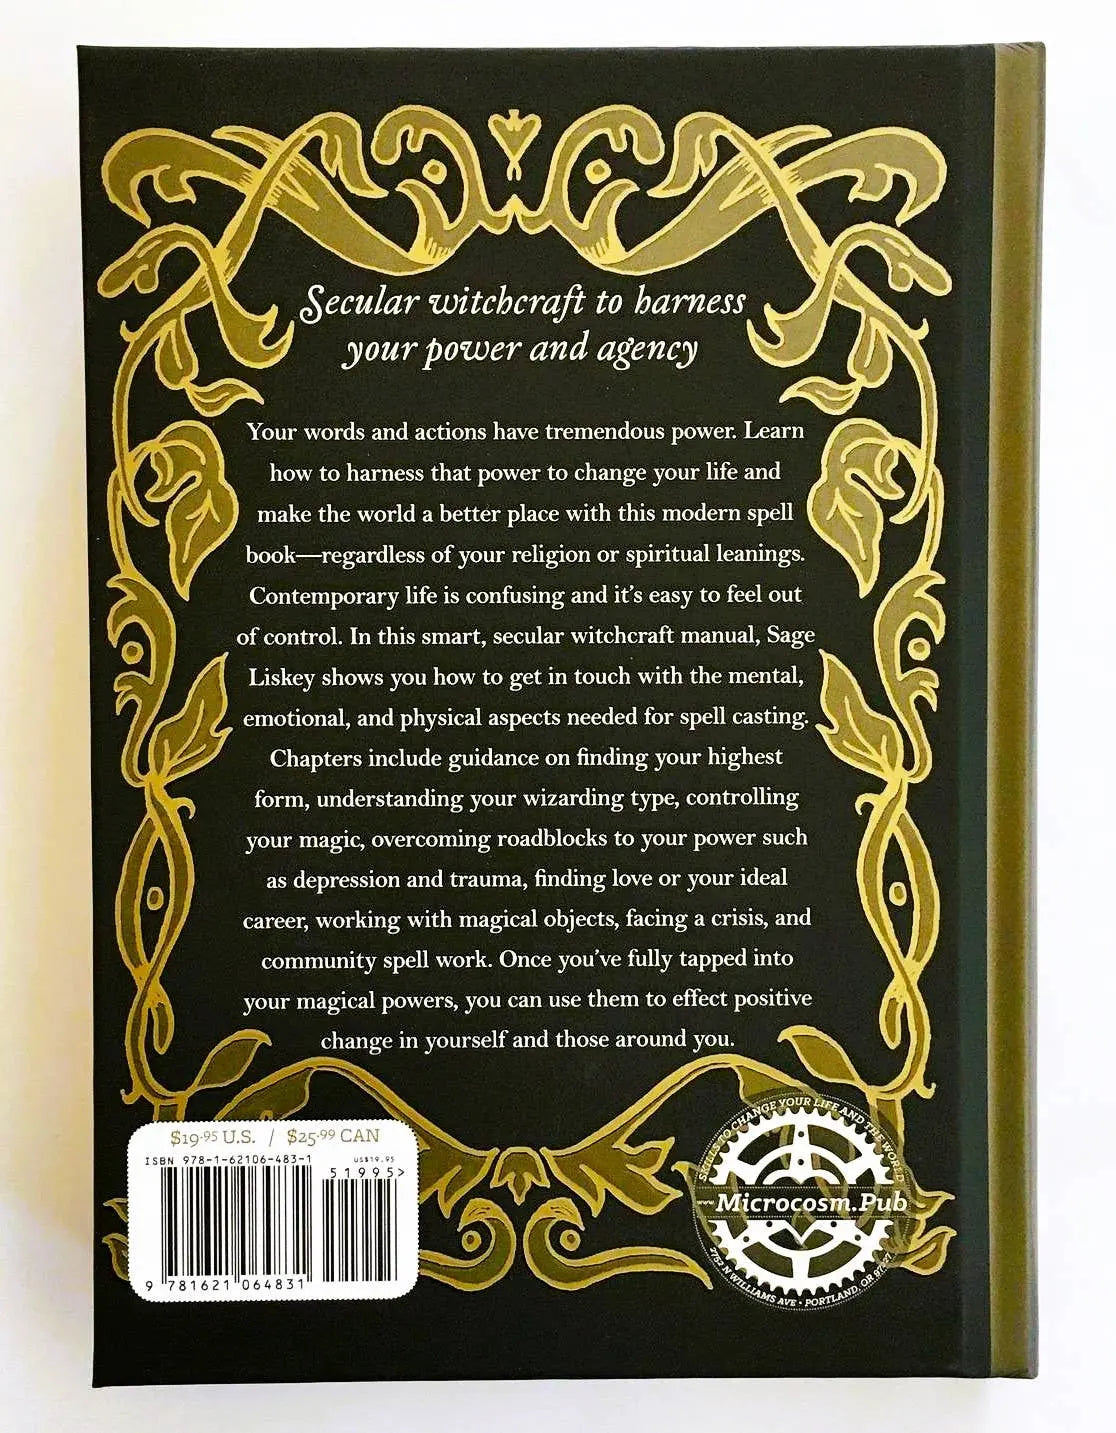 You Are a Great and Powerful Wizard: Self-Care Magic Microcosm Publishing & Distribution